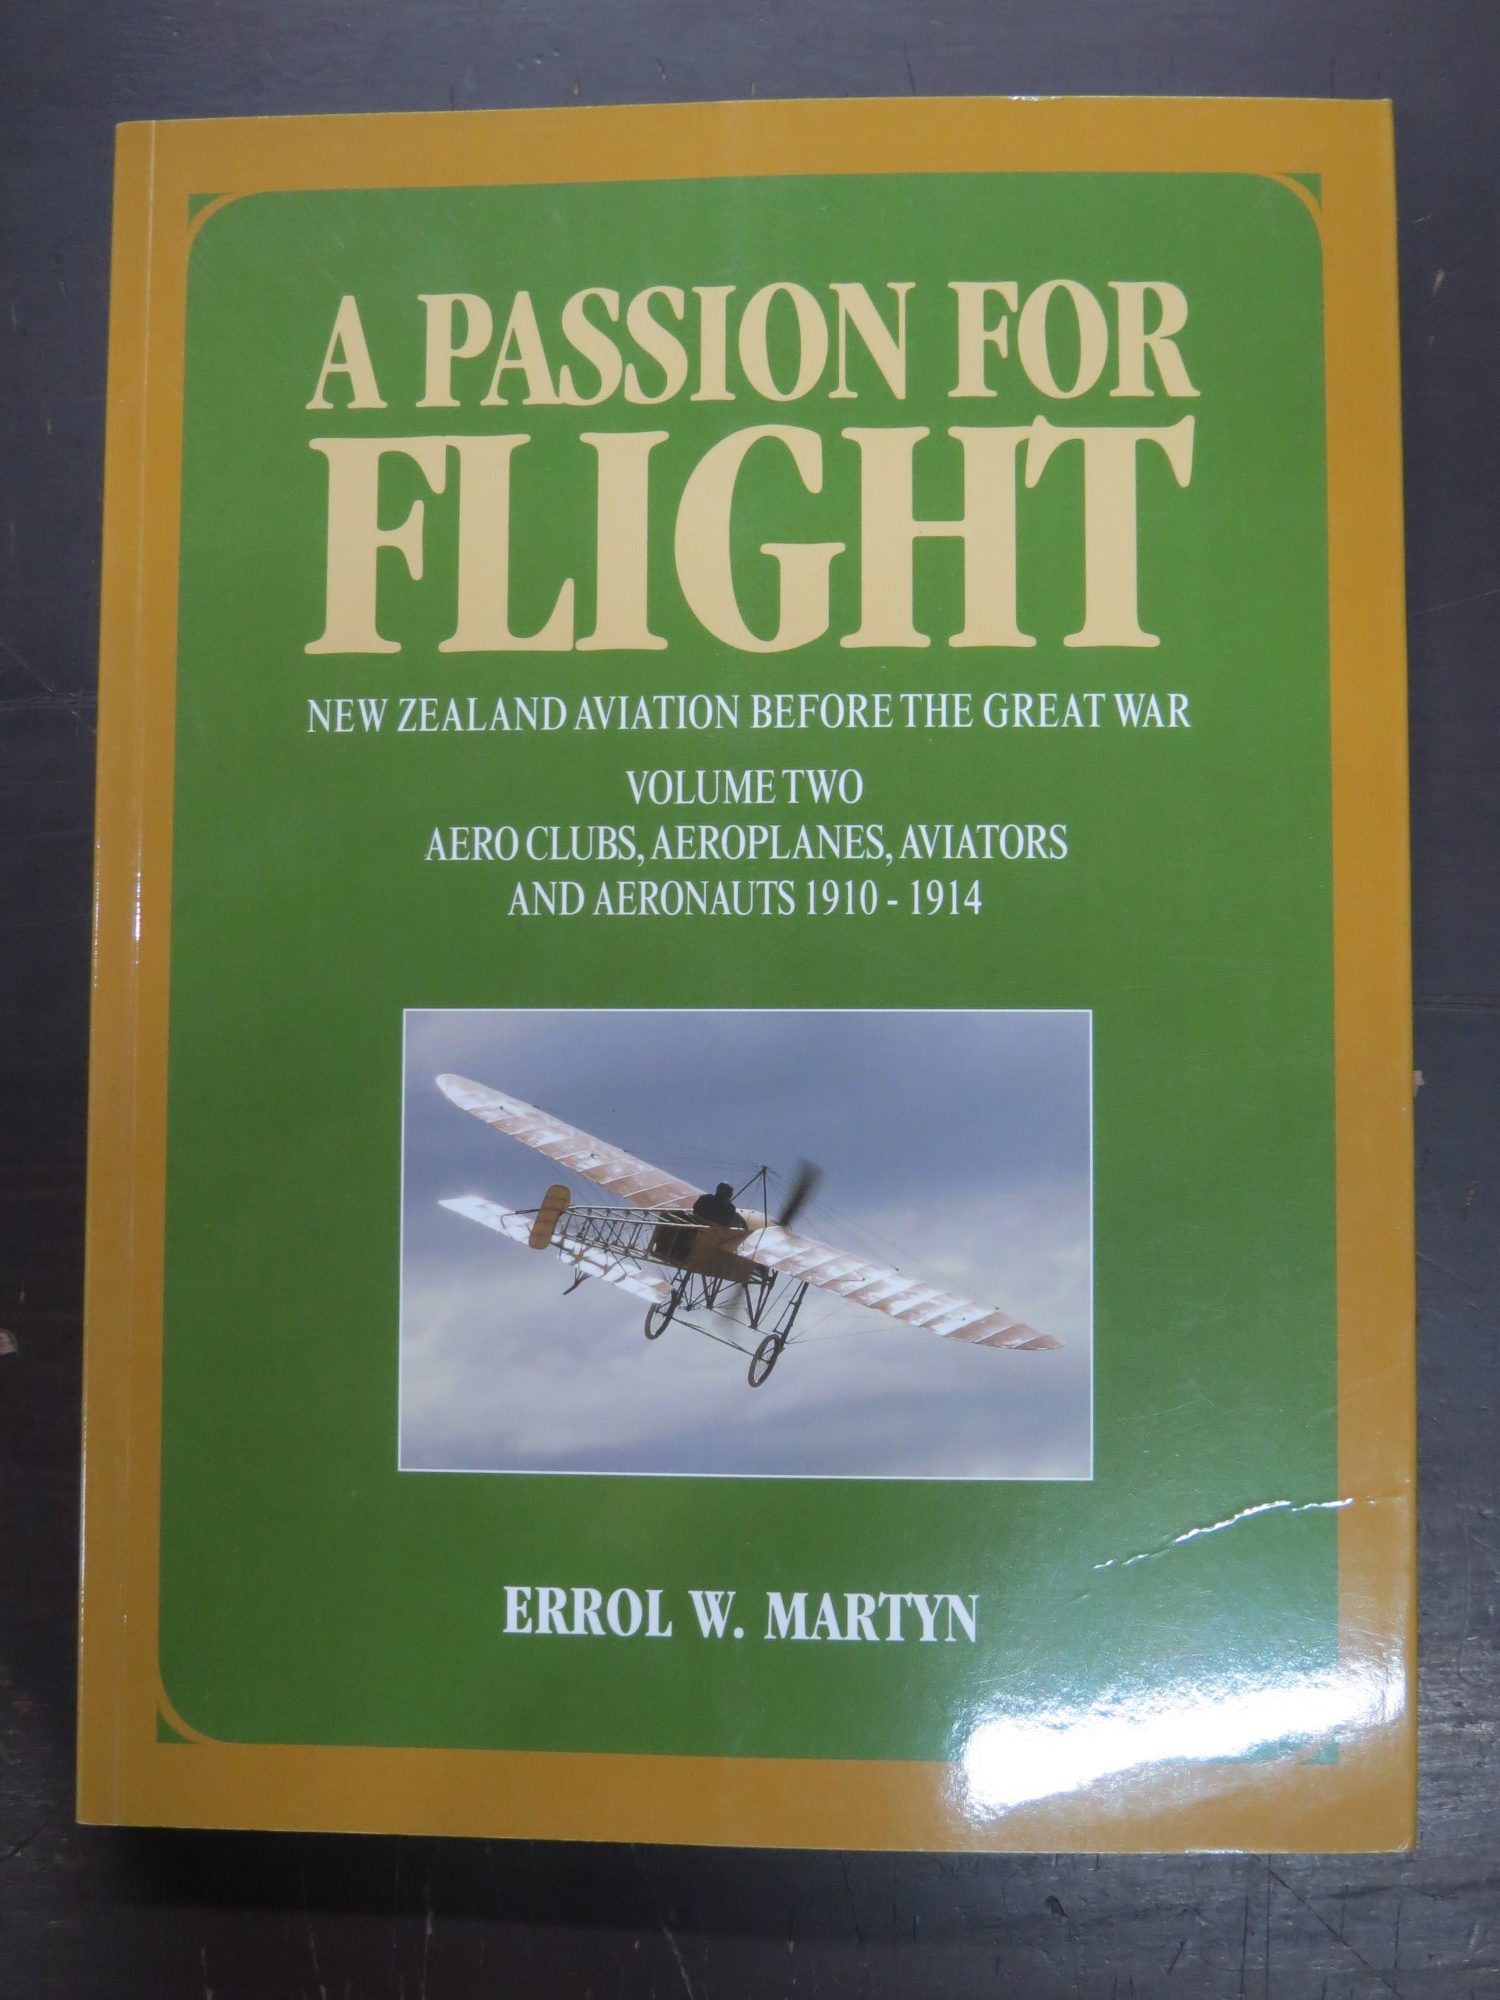 Errol W. Martin, A Passion For Flight, New Zealand Aviation Before the ...